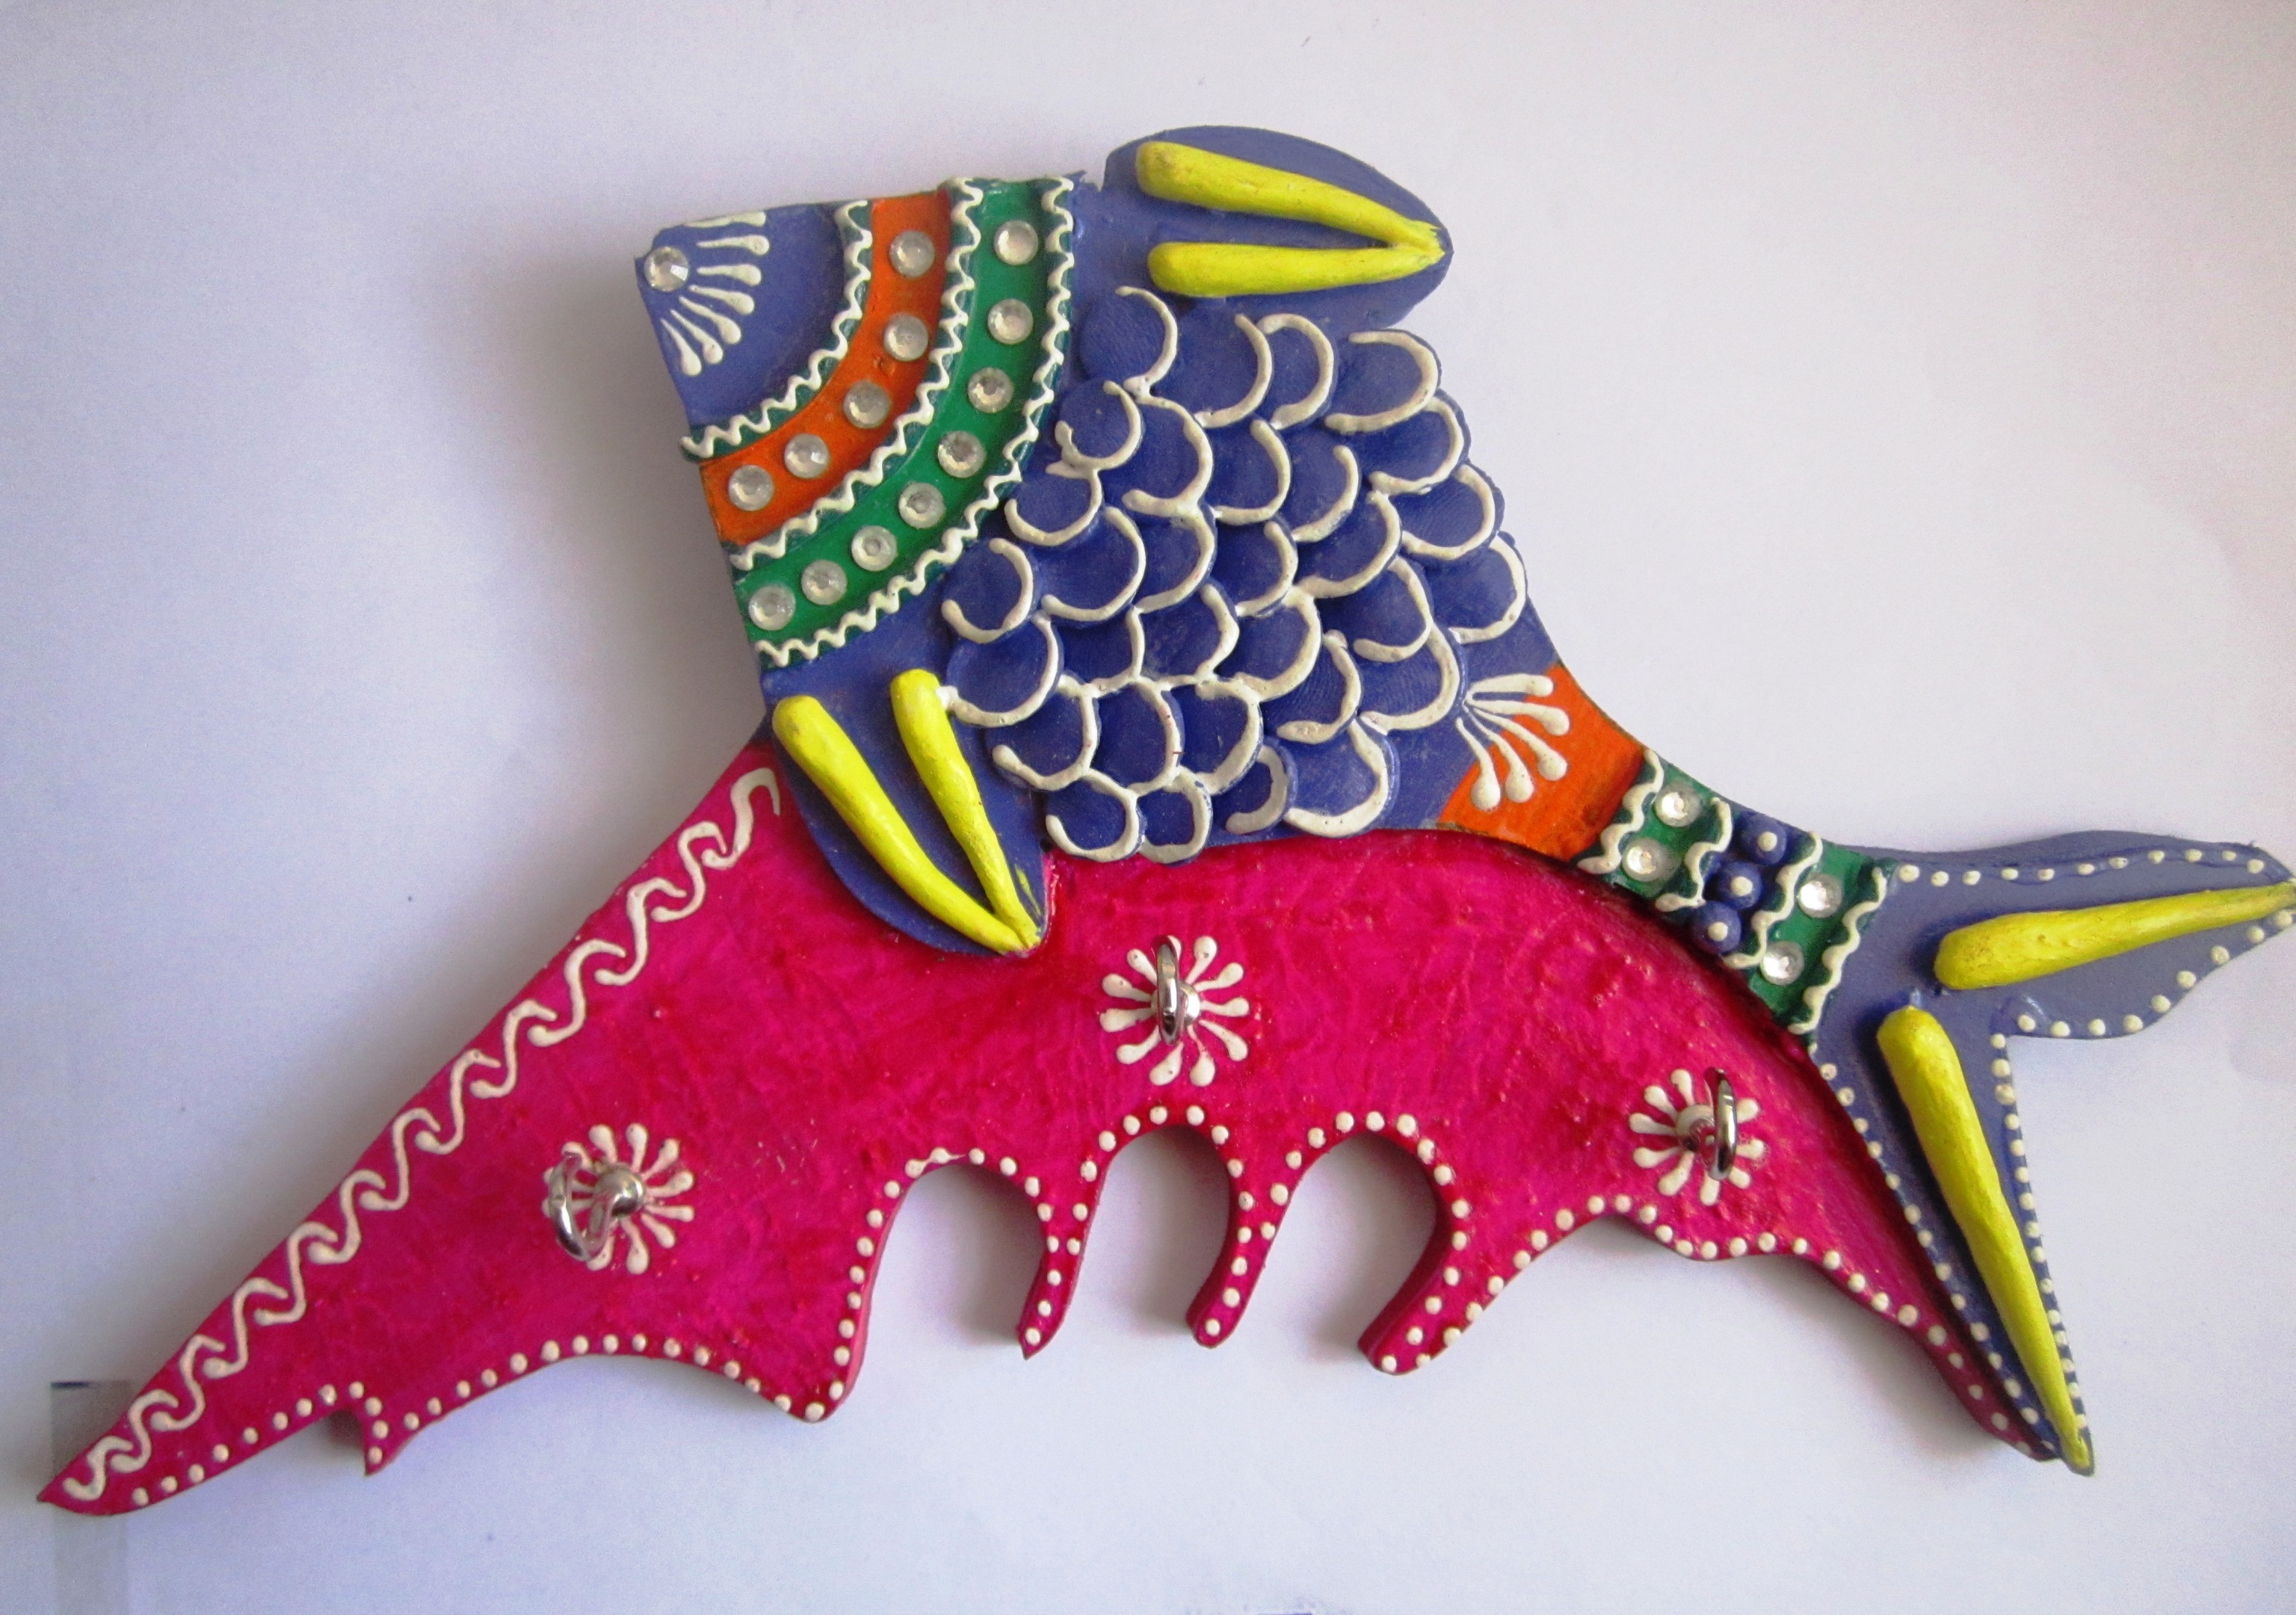 Fish Shape Key Holder at Best Prices - Shopclues Online Shopping Store